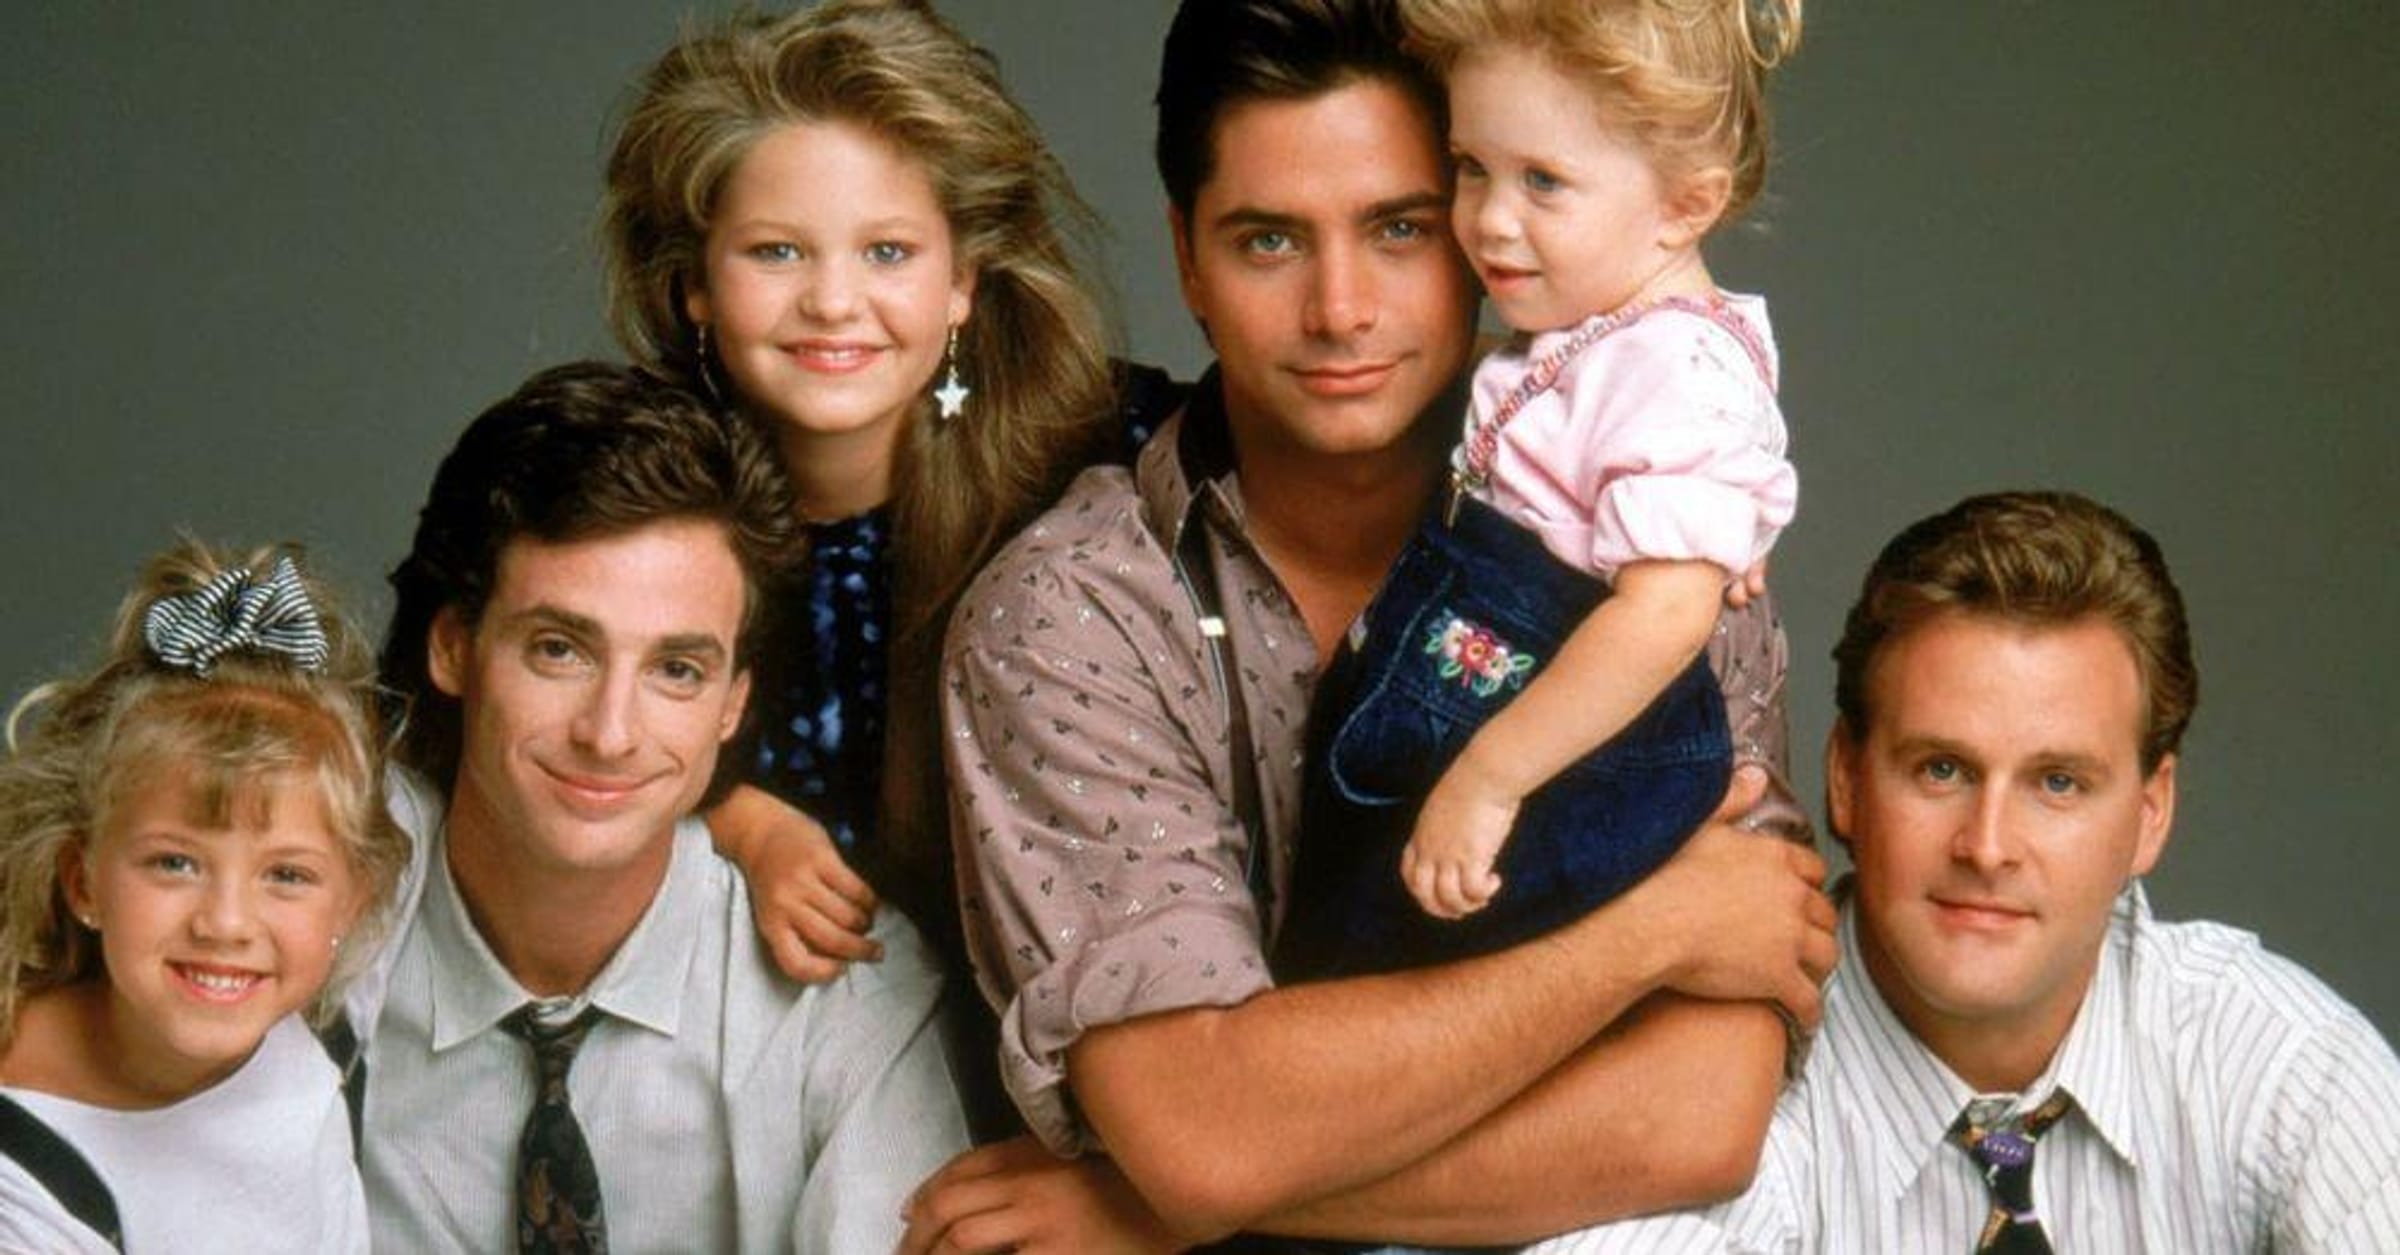 How the Cast of 'Full House' Aged from the First to Last Season